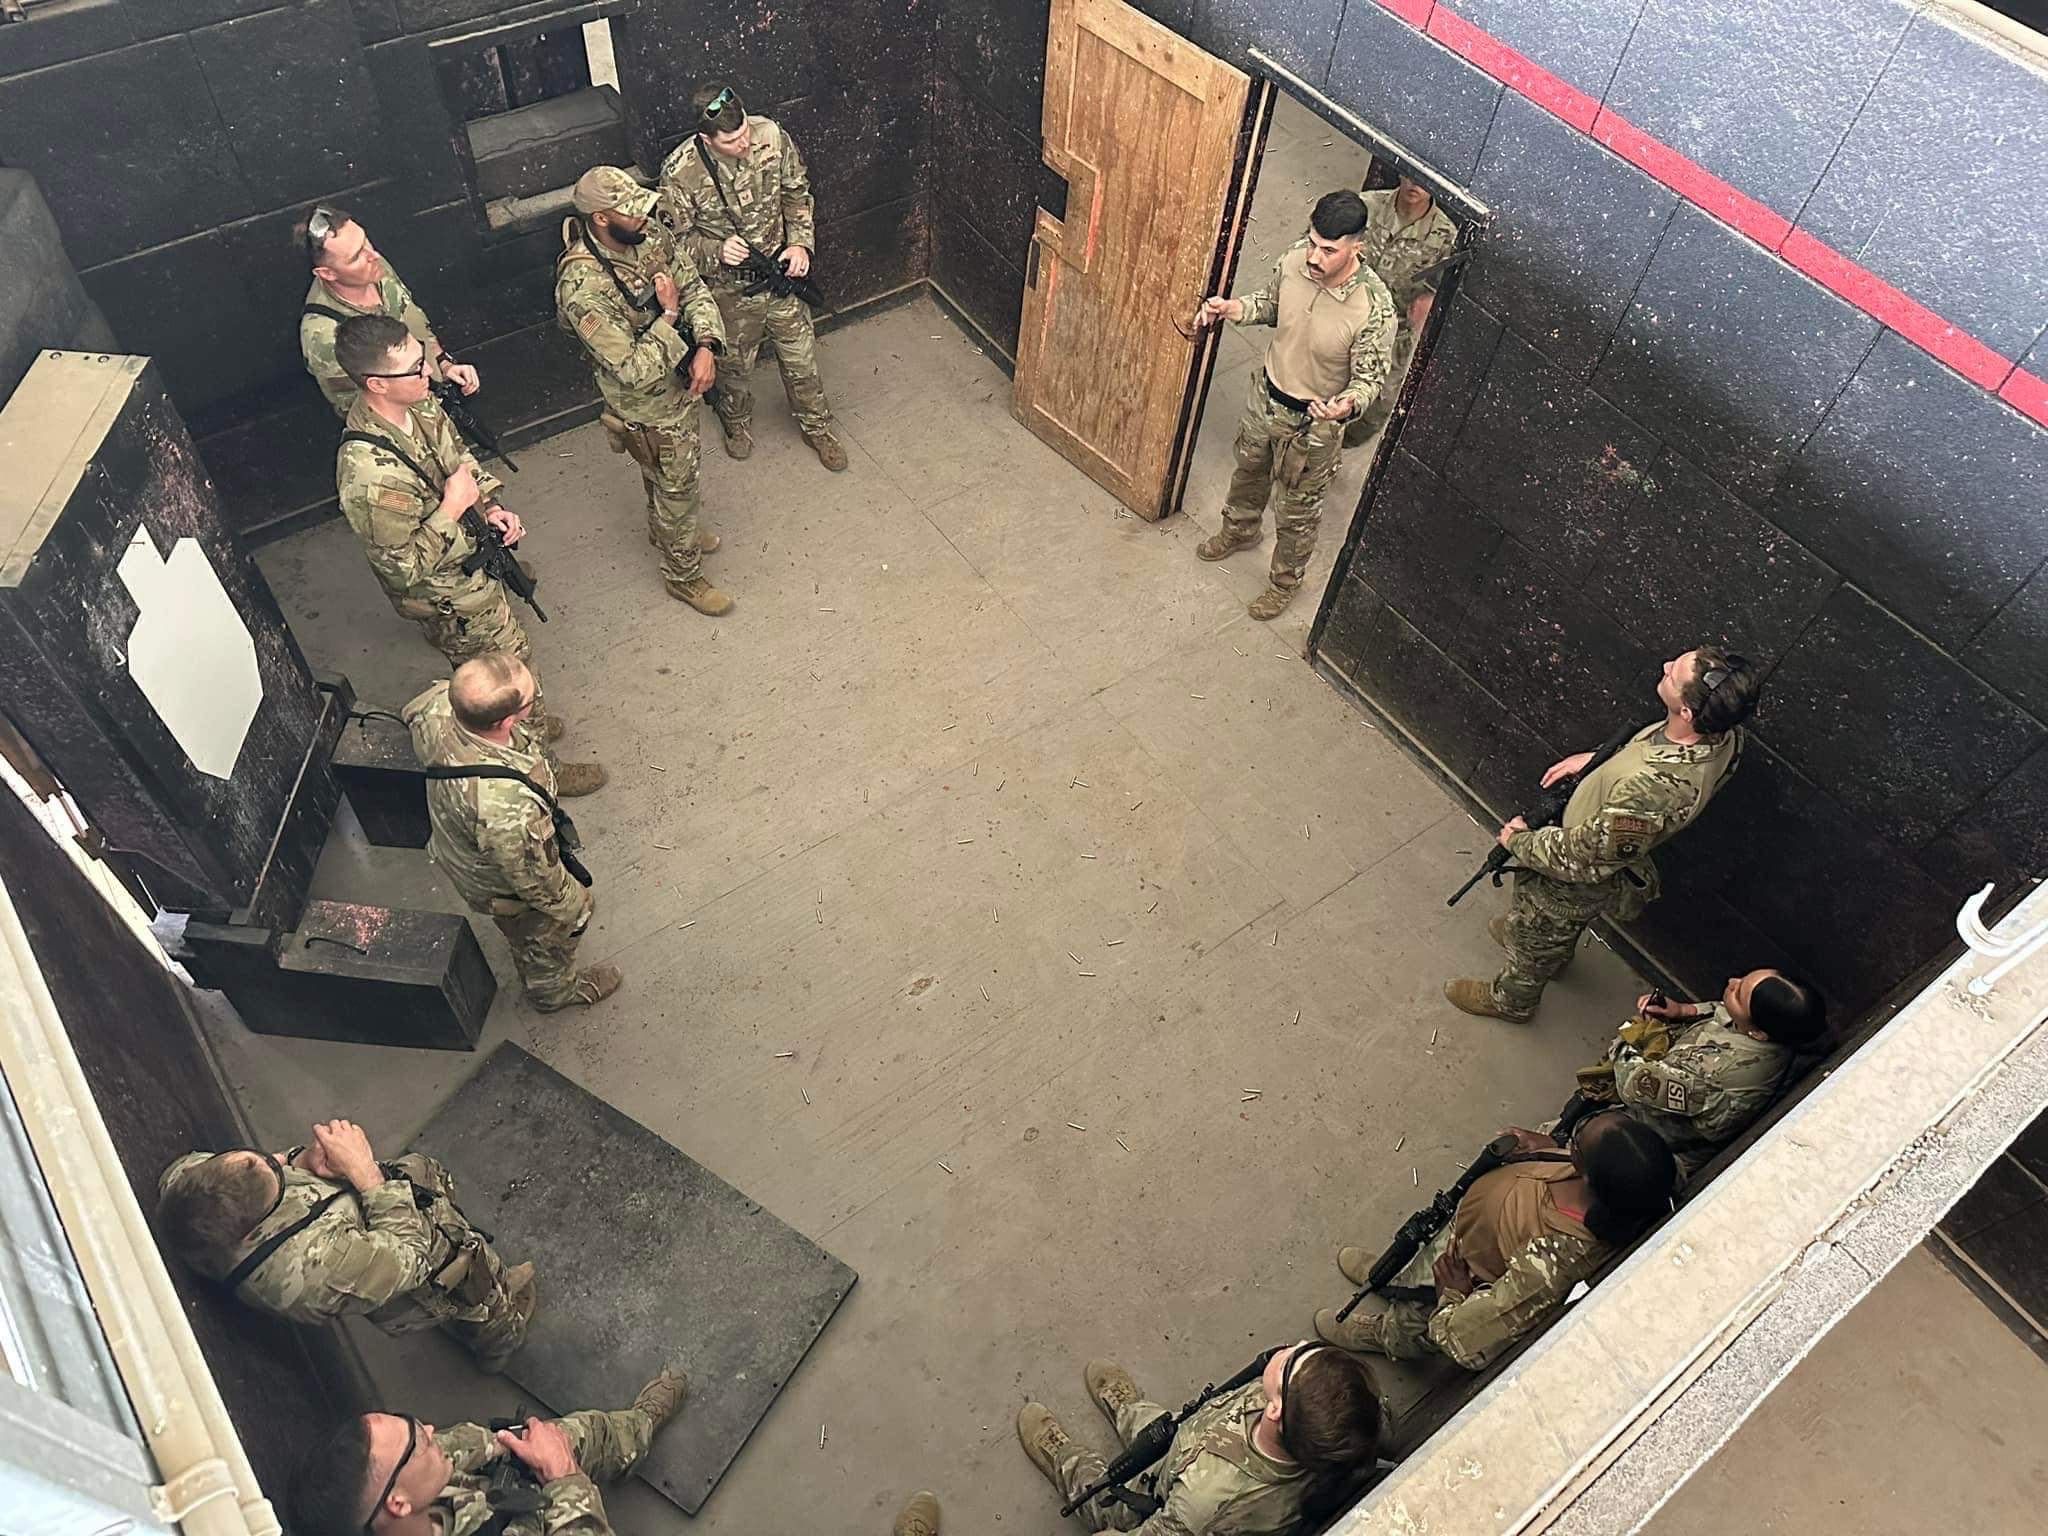 A group of military men gathered in a live fire shoot house conducting training in close quarters battle